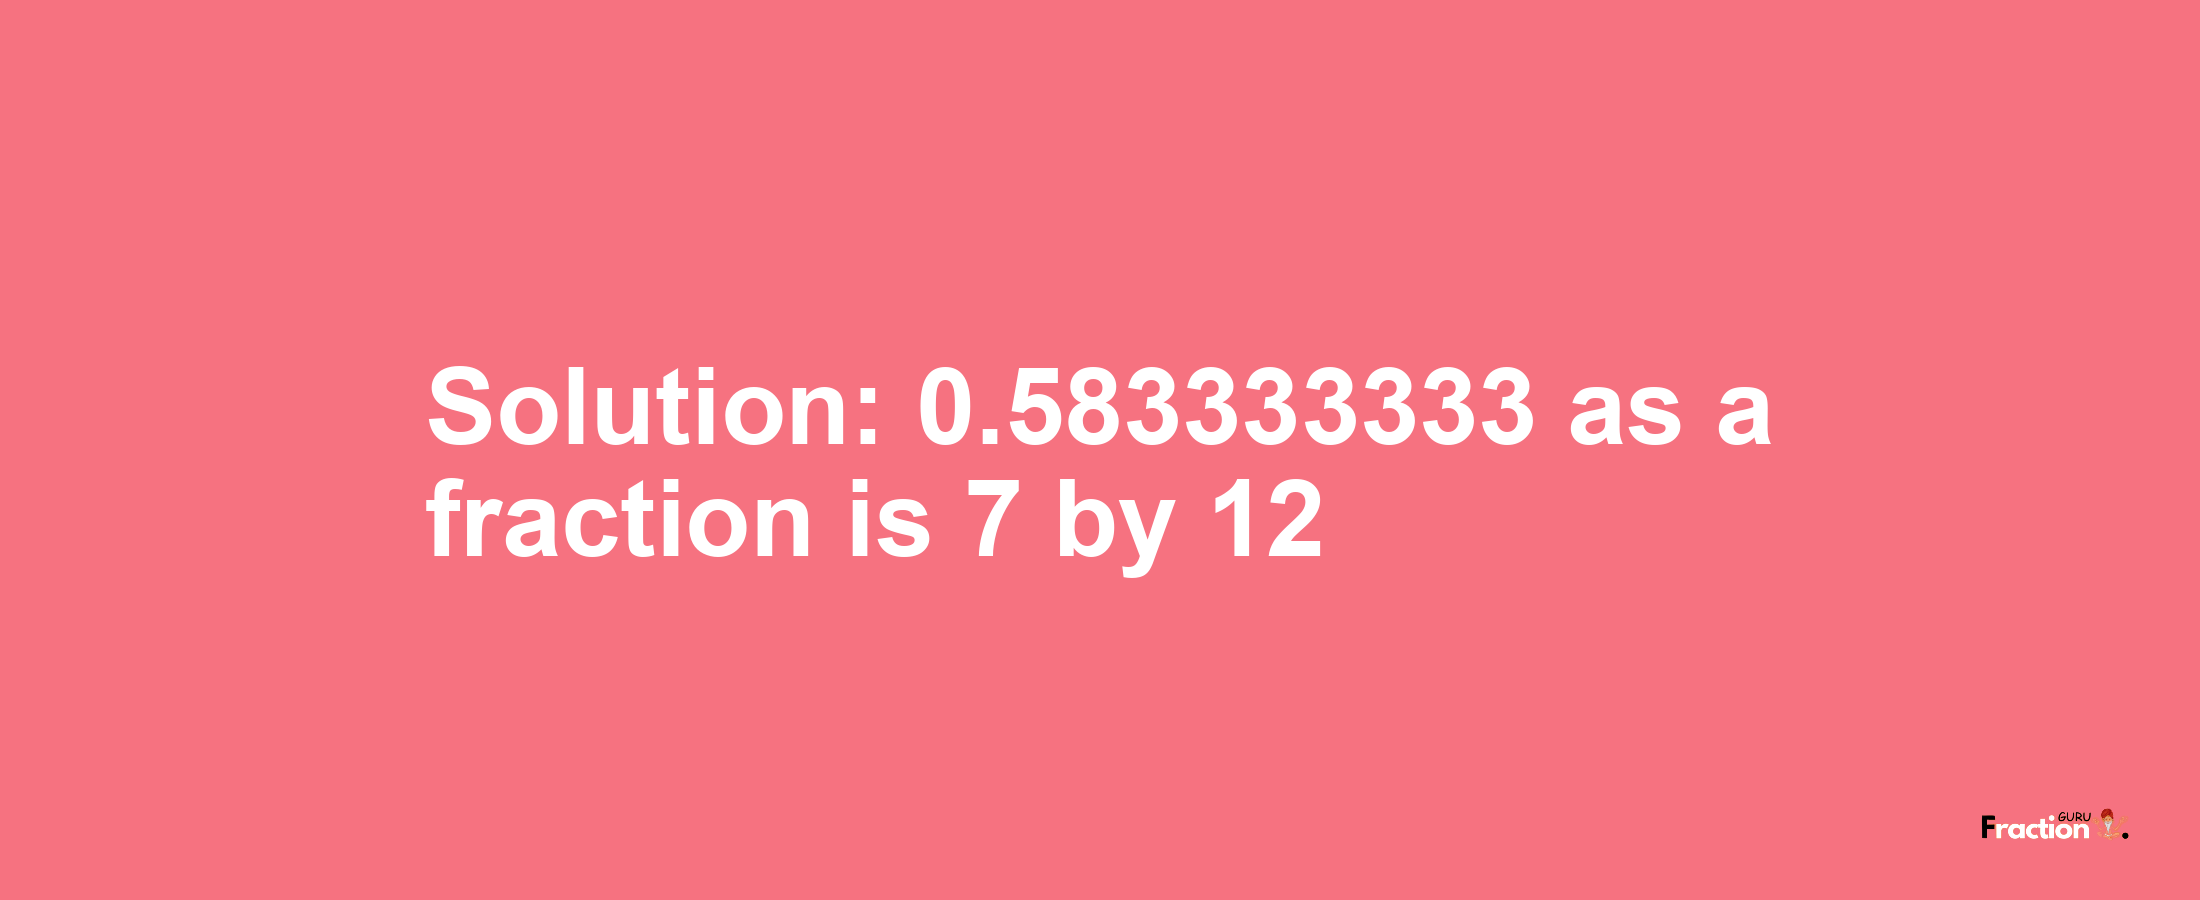 Solution:0.583333333 as a fraction is 7/12